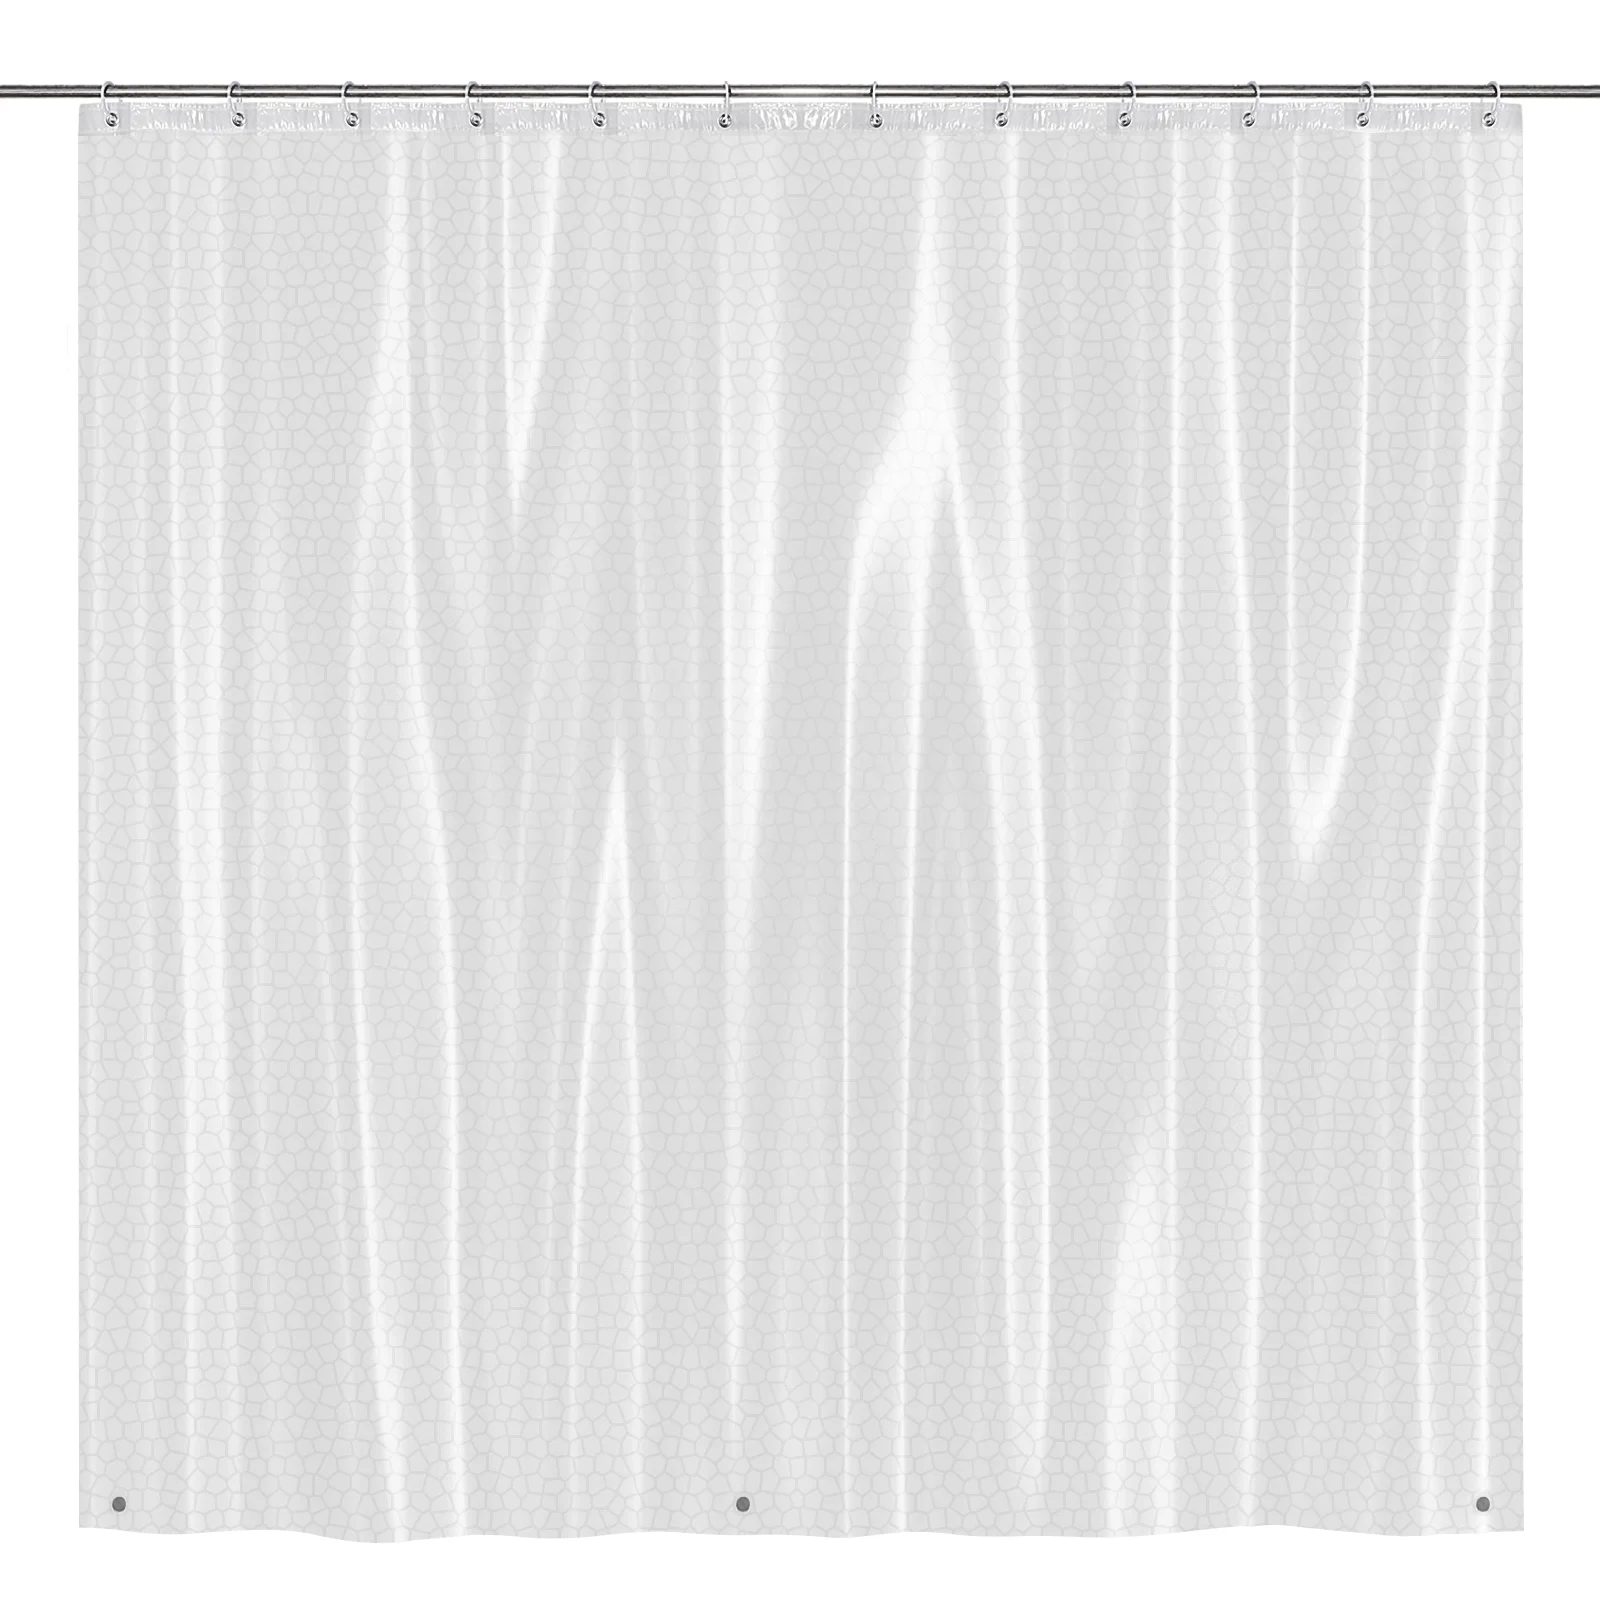 

Stand Sheer Drapes Clear Curtain Liner Waterproof Shower Stall Eva For Bathroom Up